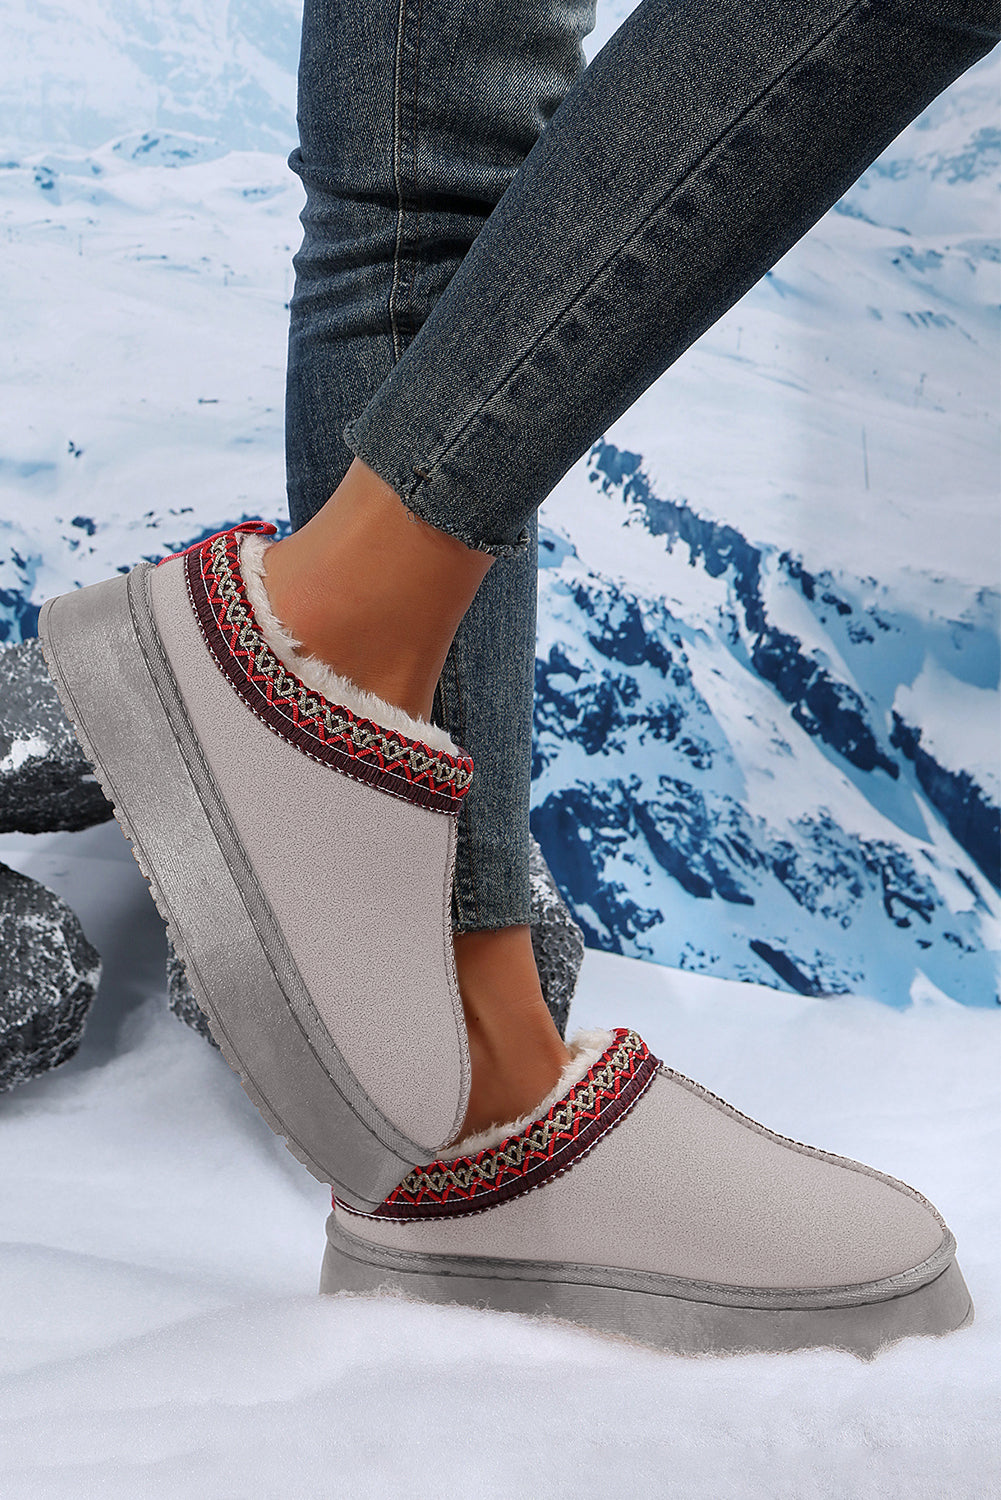 Gray Suede Contrast Print Plush Lined Snow Boots